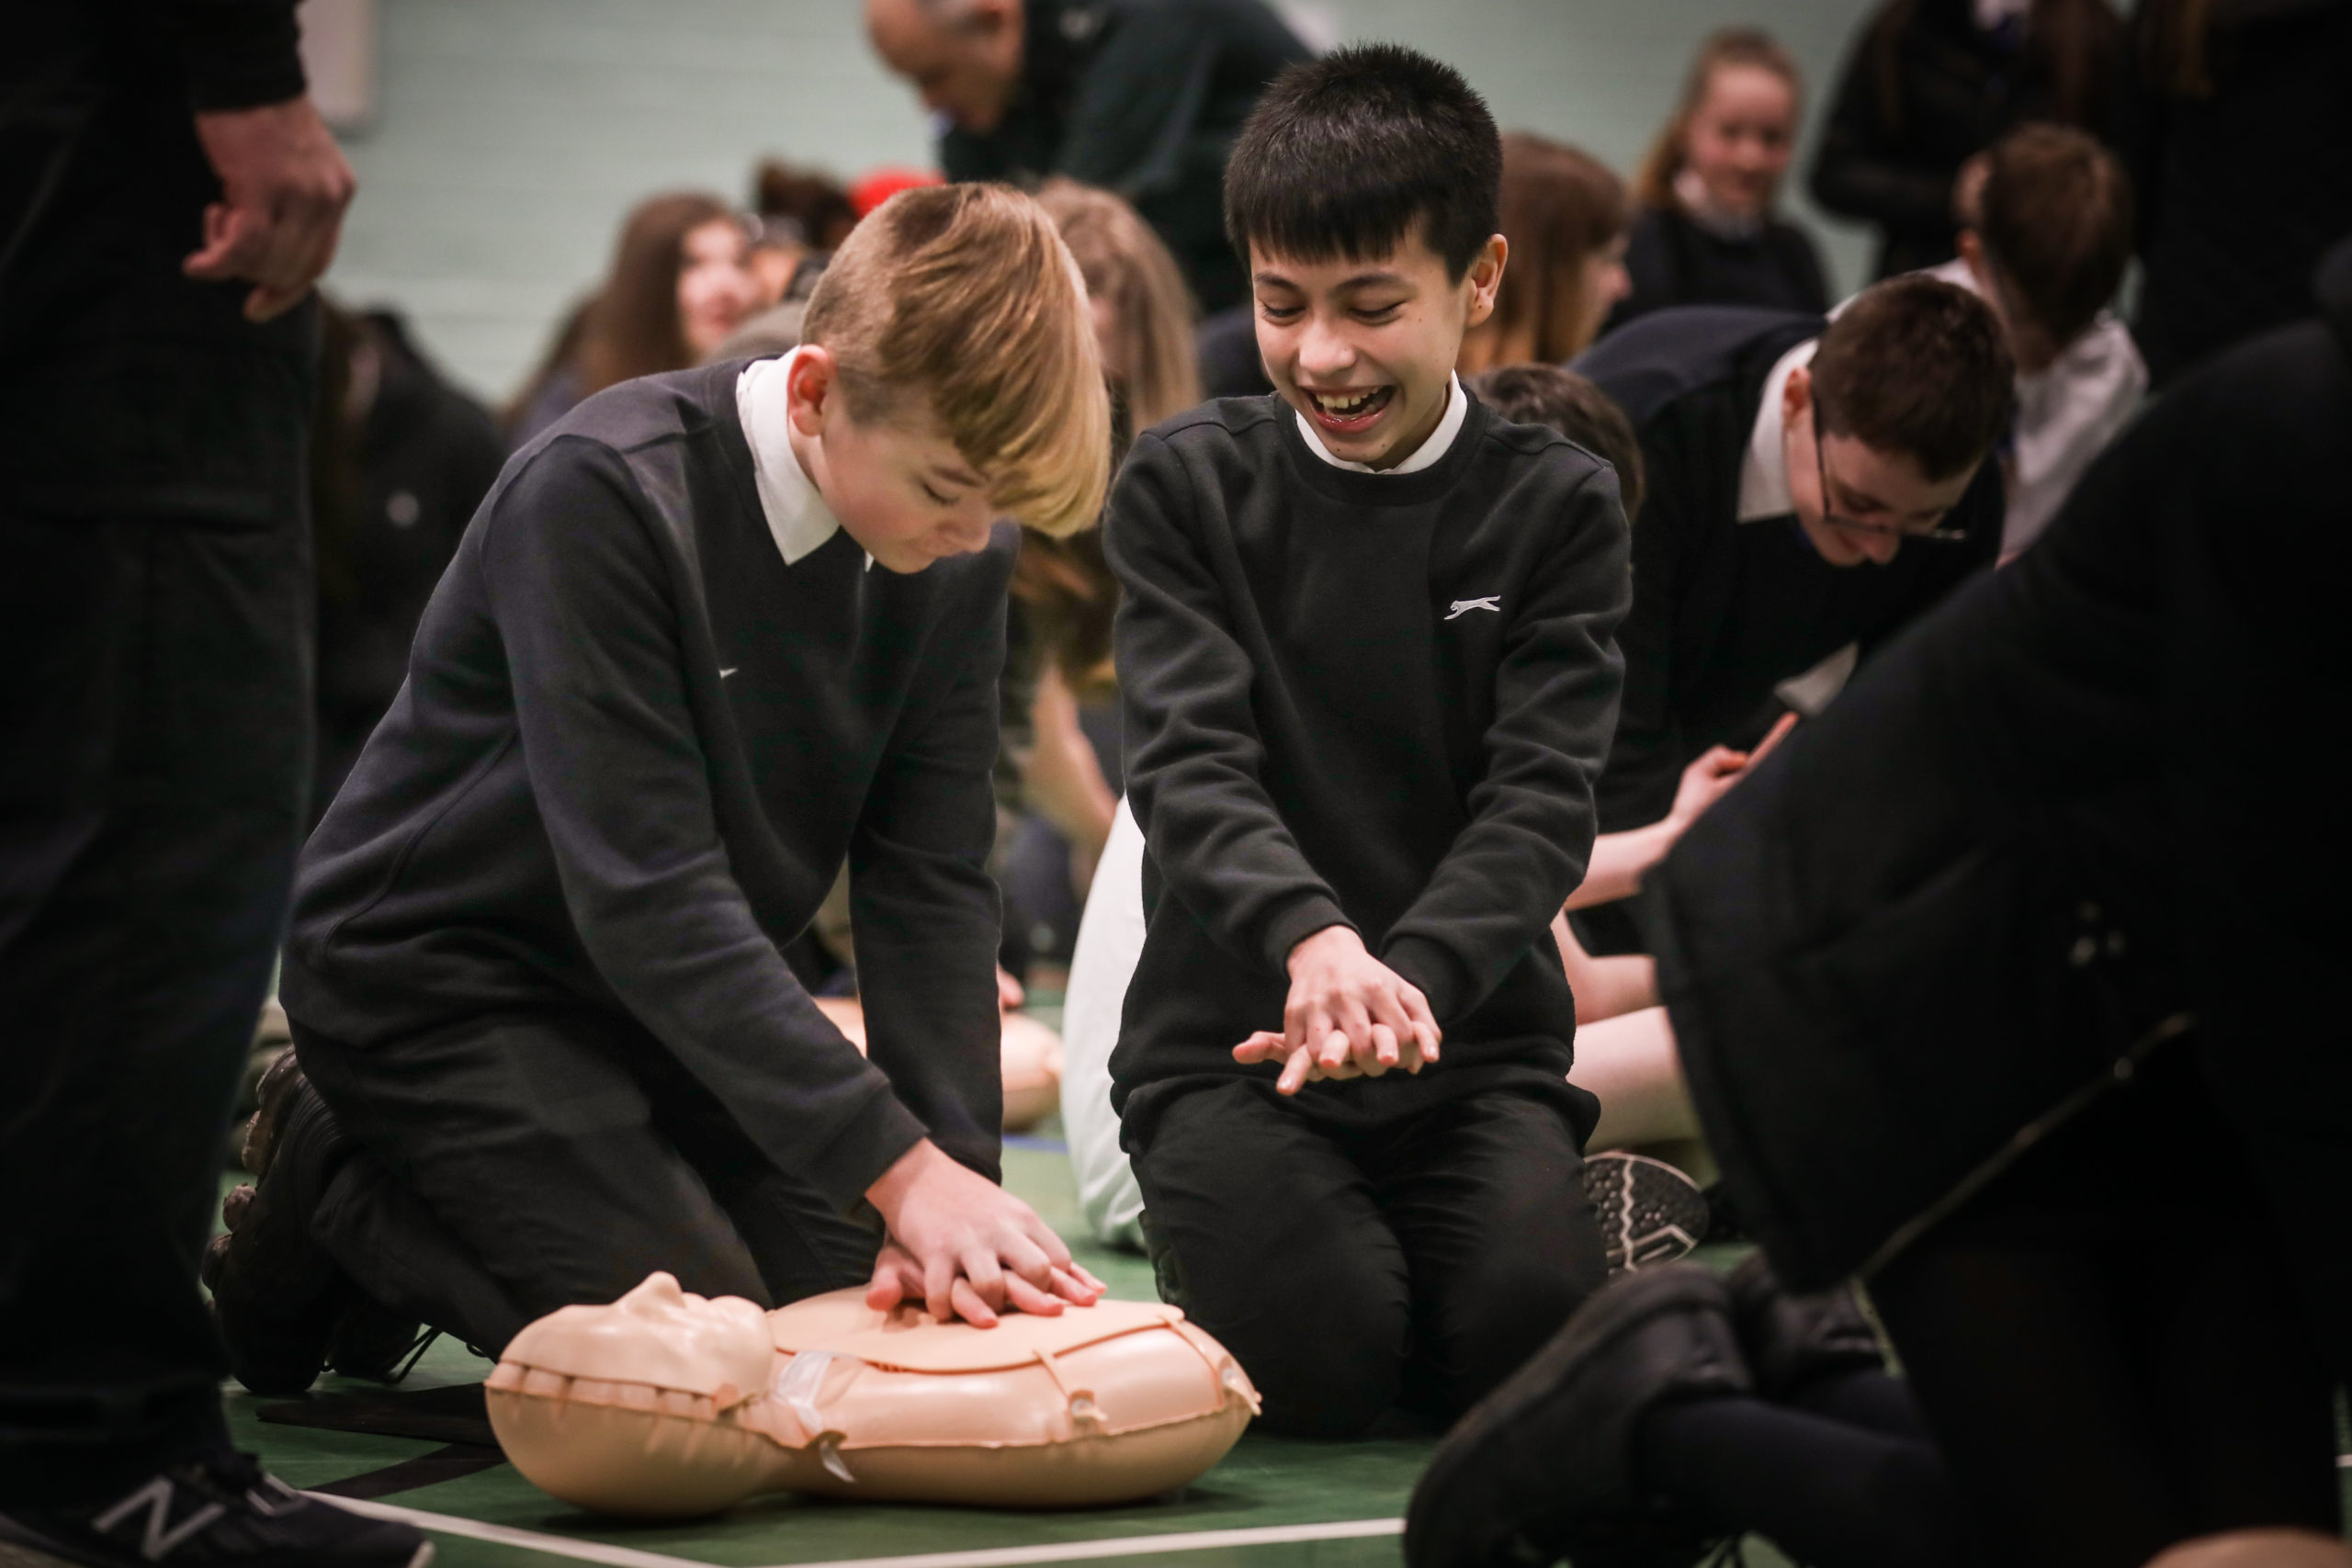 Perth High School pupils, Cameron Craik, 14 and Myles Woodside, 12, doing CPR training.